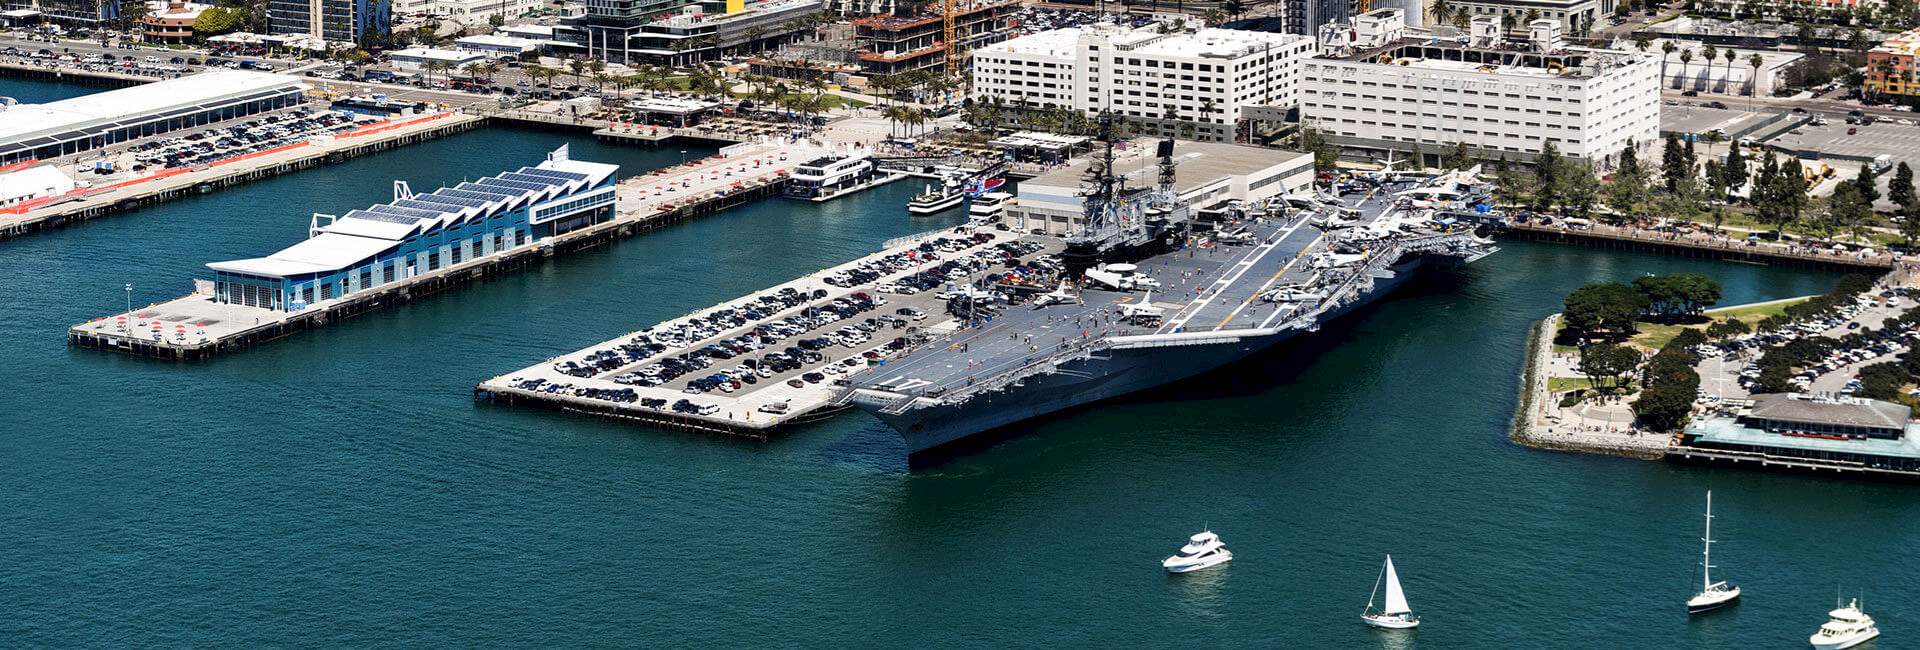 best-western-lamplighter-inn-suites-at-sdsu-specials-masthead-uss-midway-museum-package